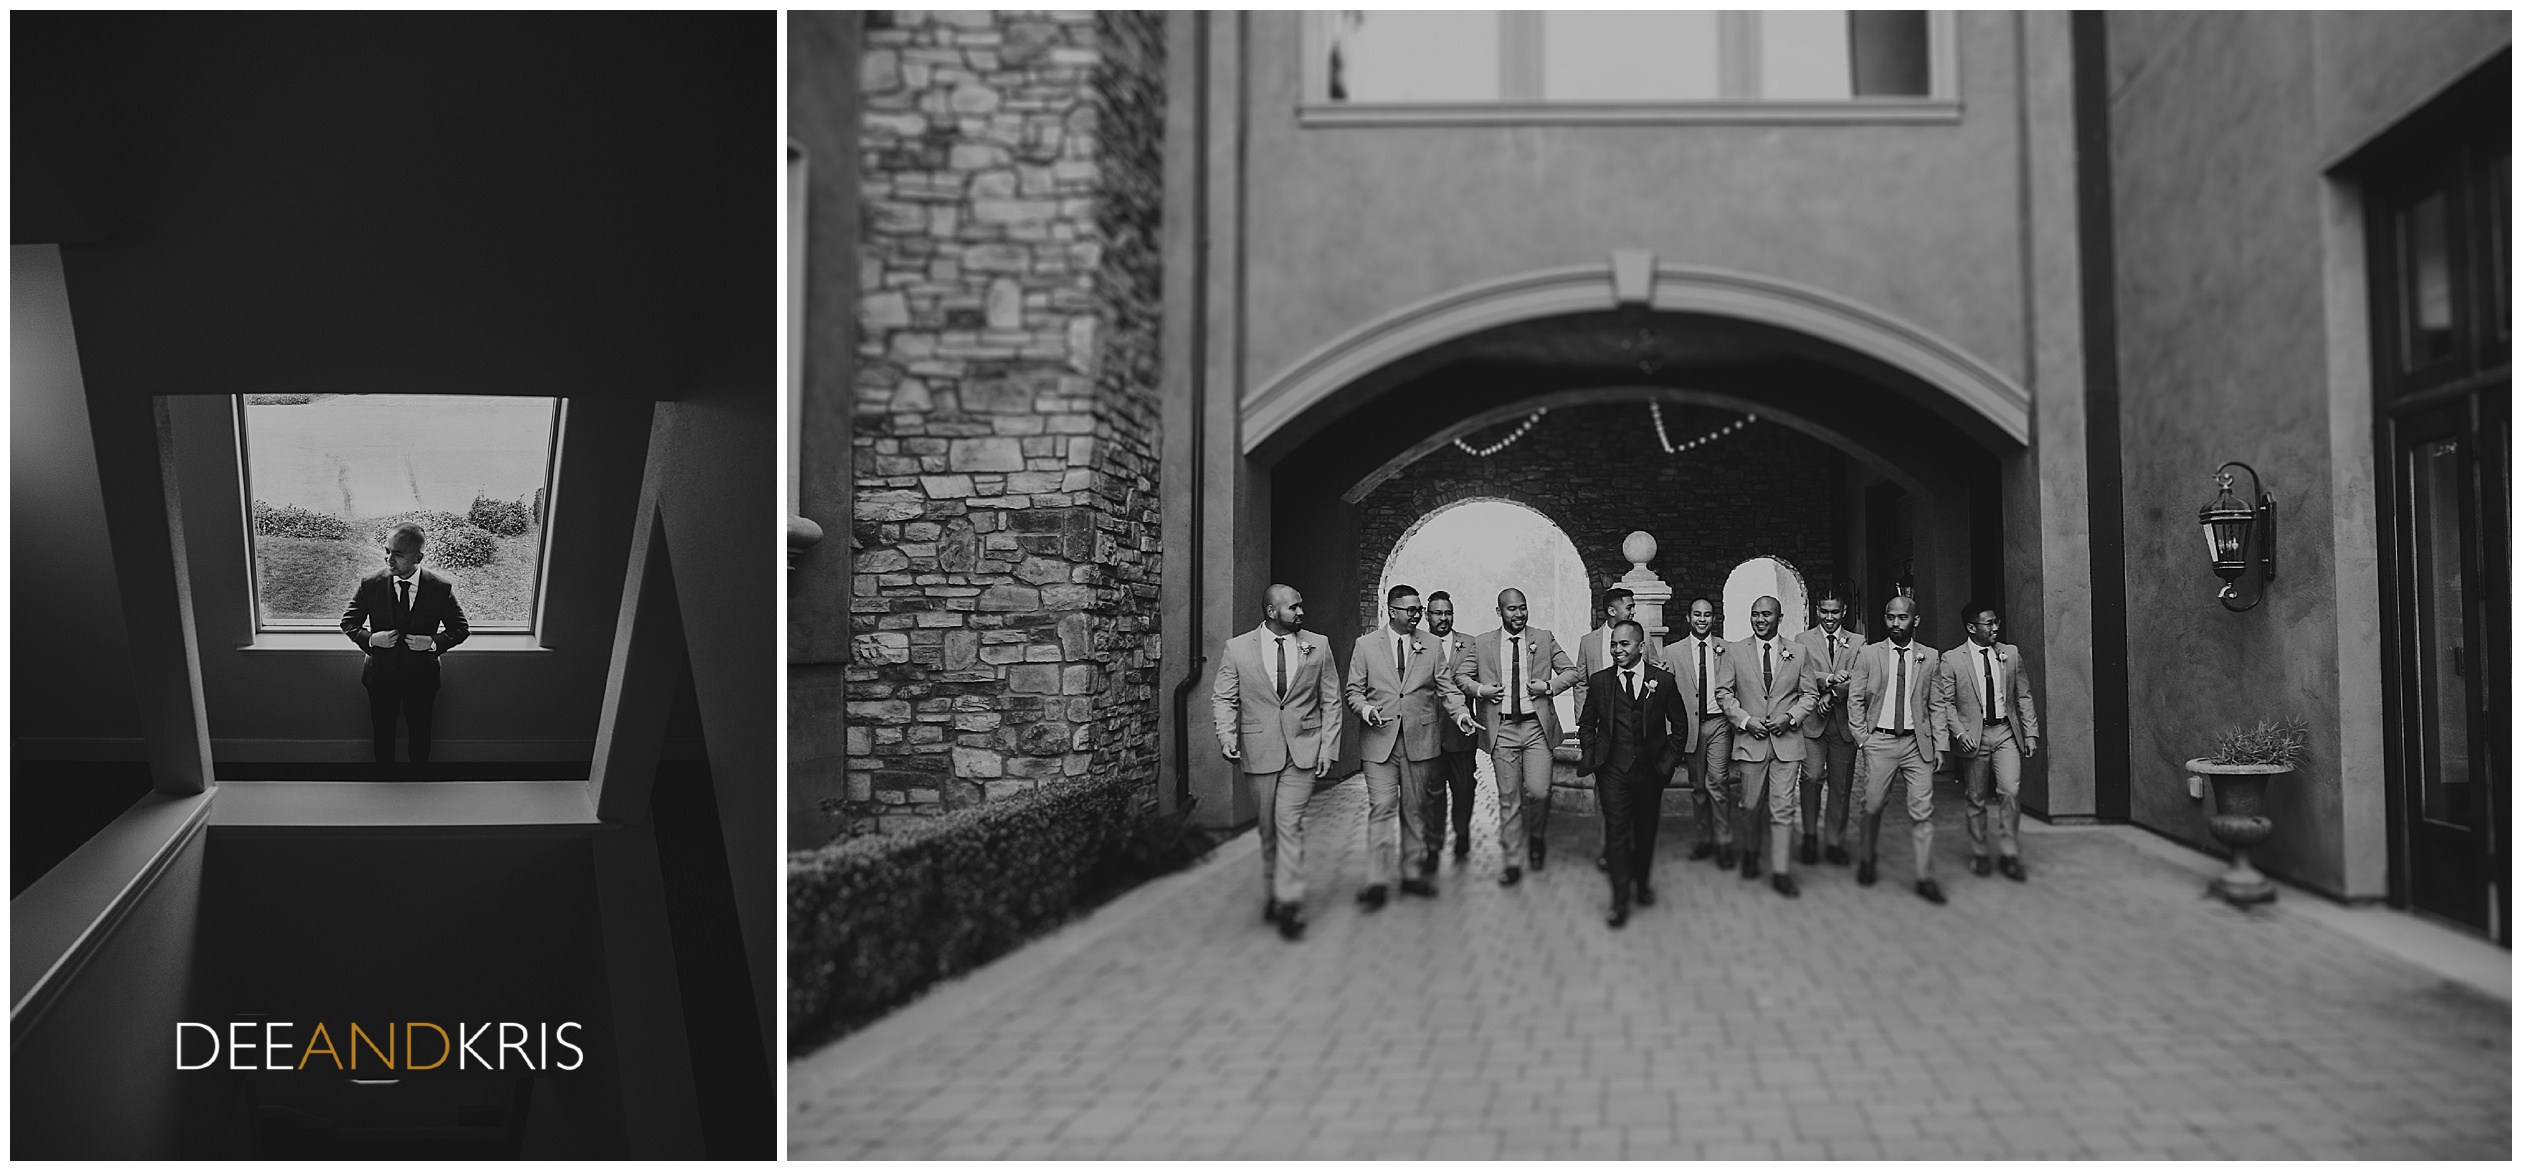 Sacramento Wedding photographers Dee and Kris photograph Groomsmen at The Westin Hotel, black and white photography